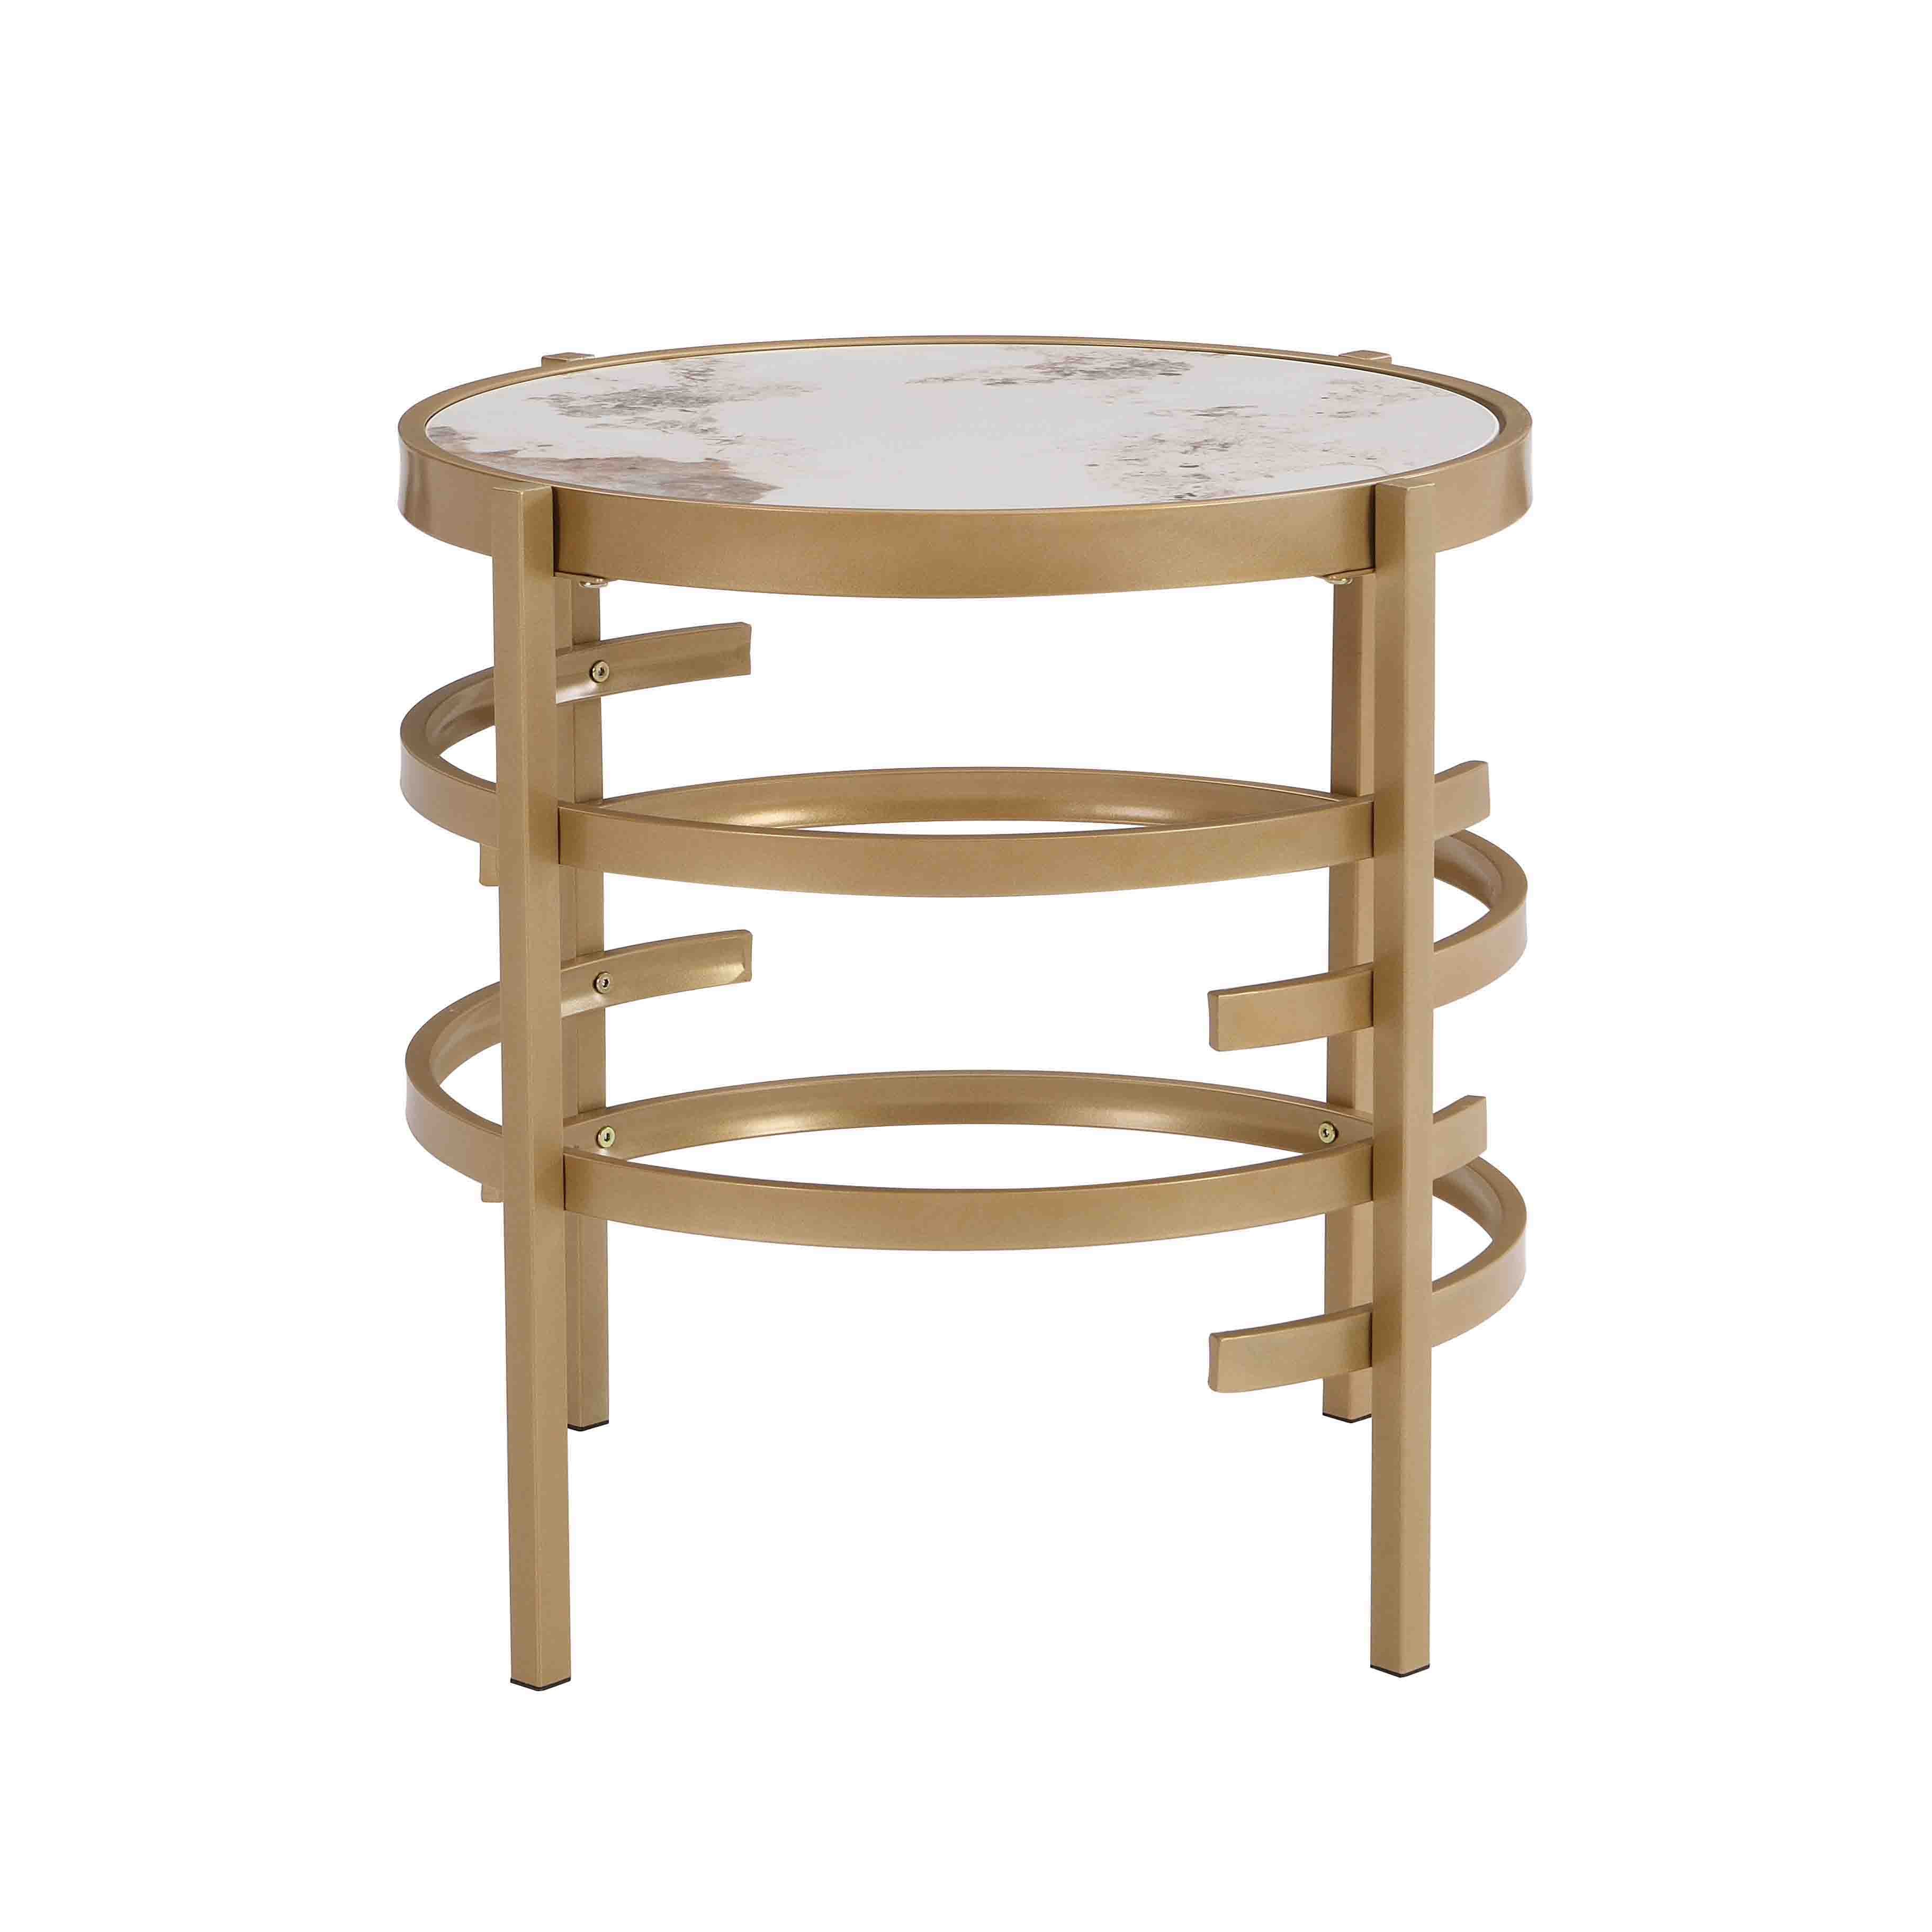 Modern Side Table, Pandora Sintered Stone End Table, Golden Small Coffee Table